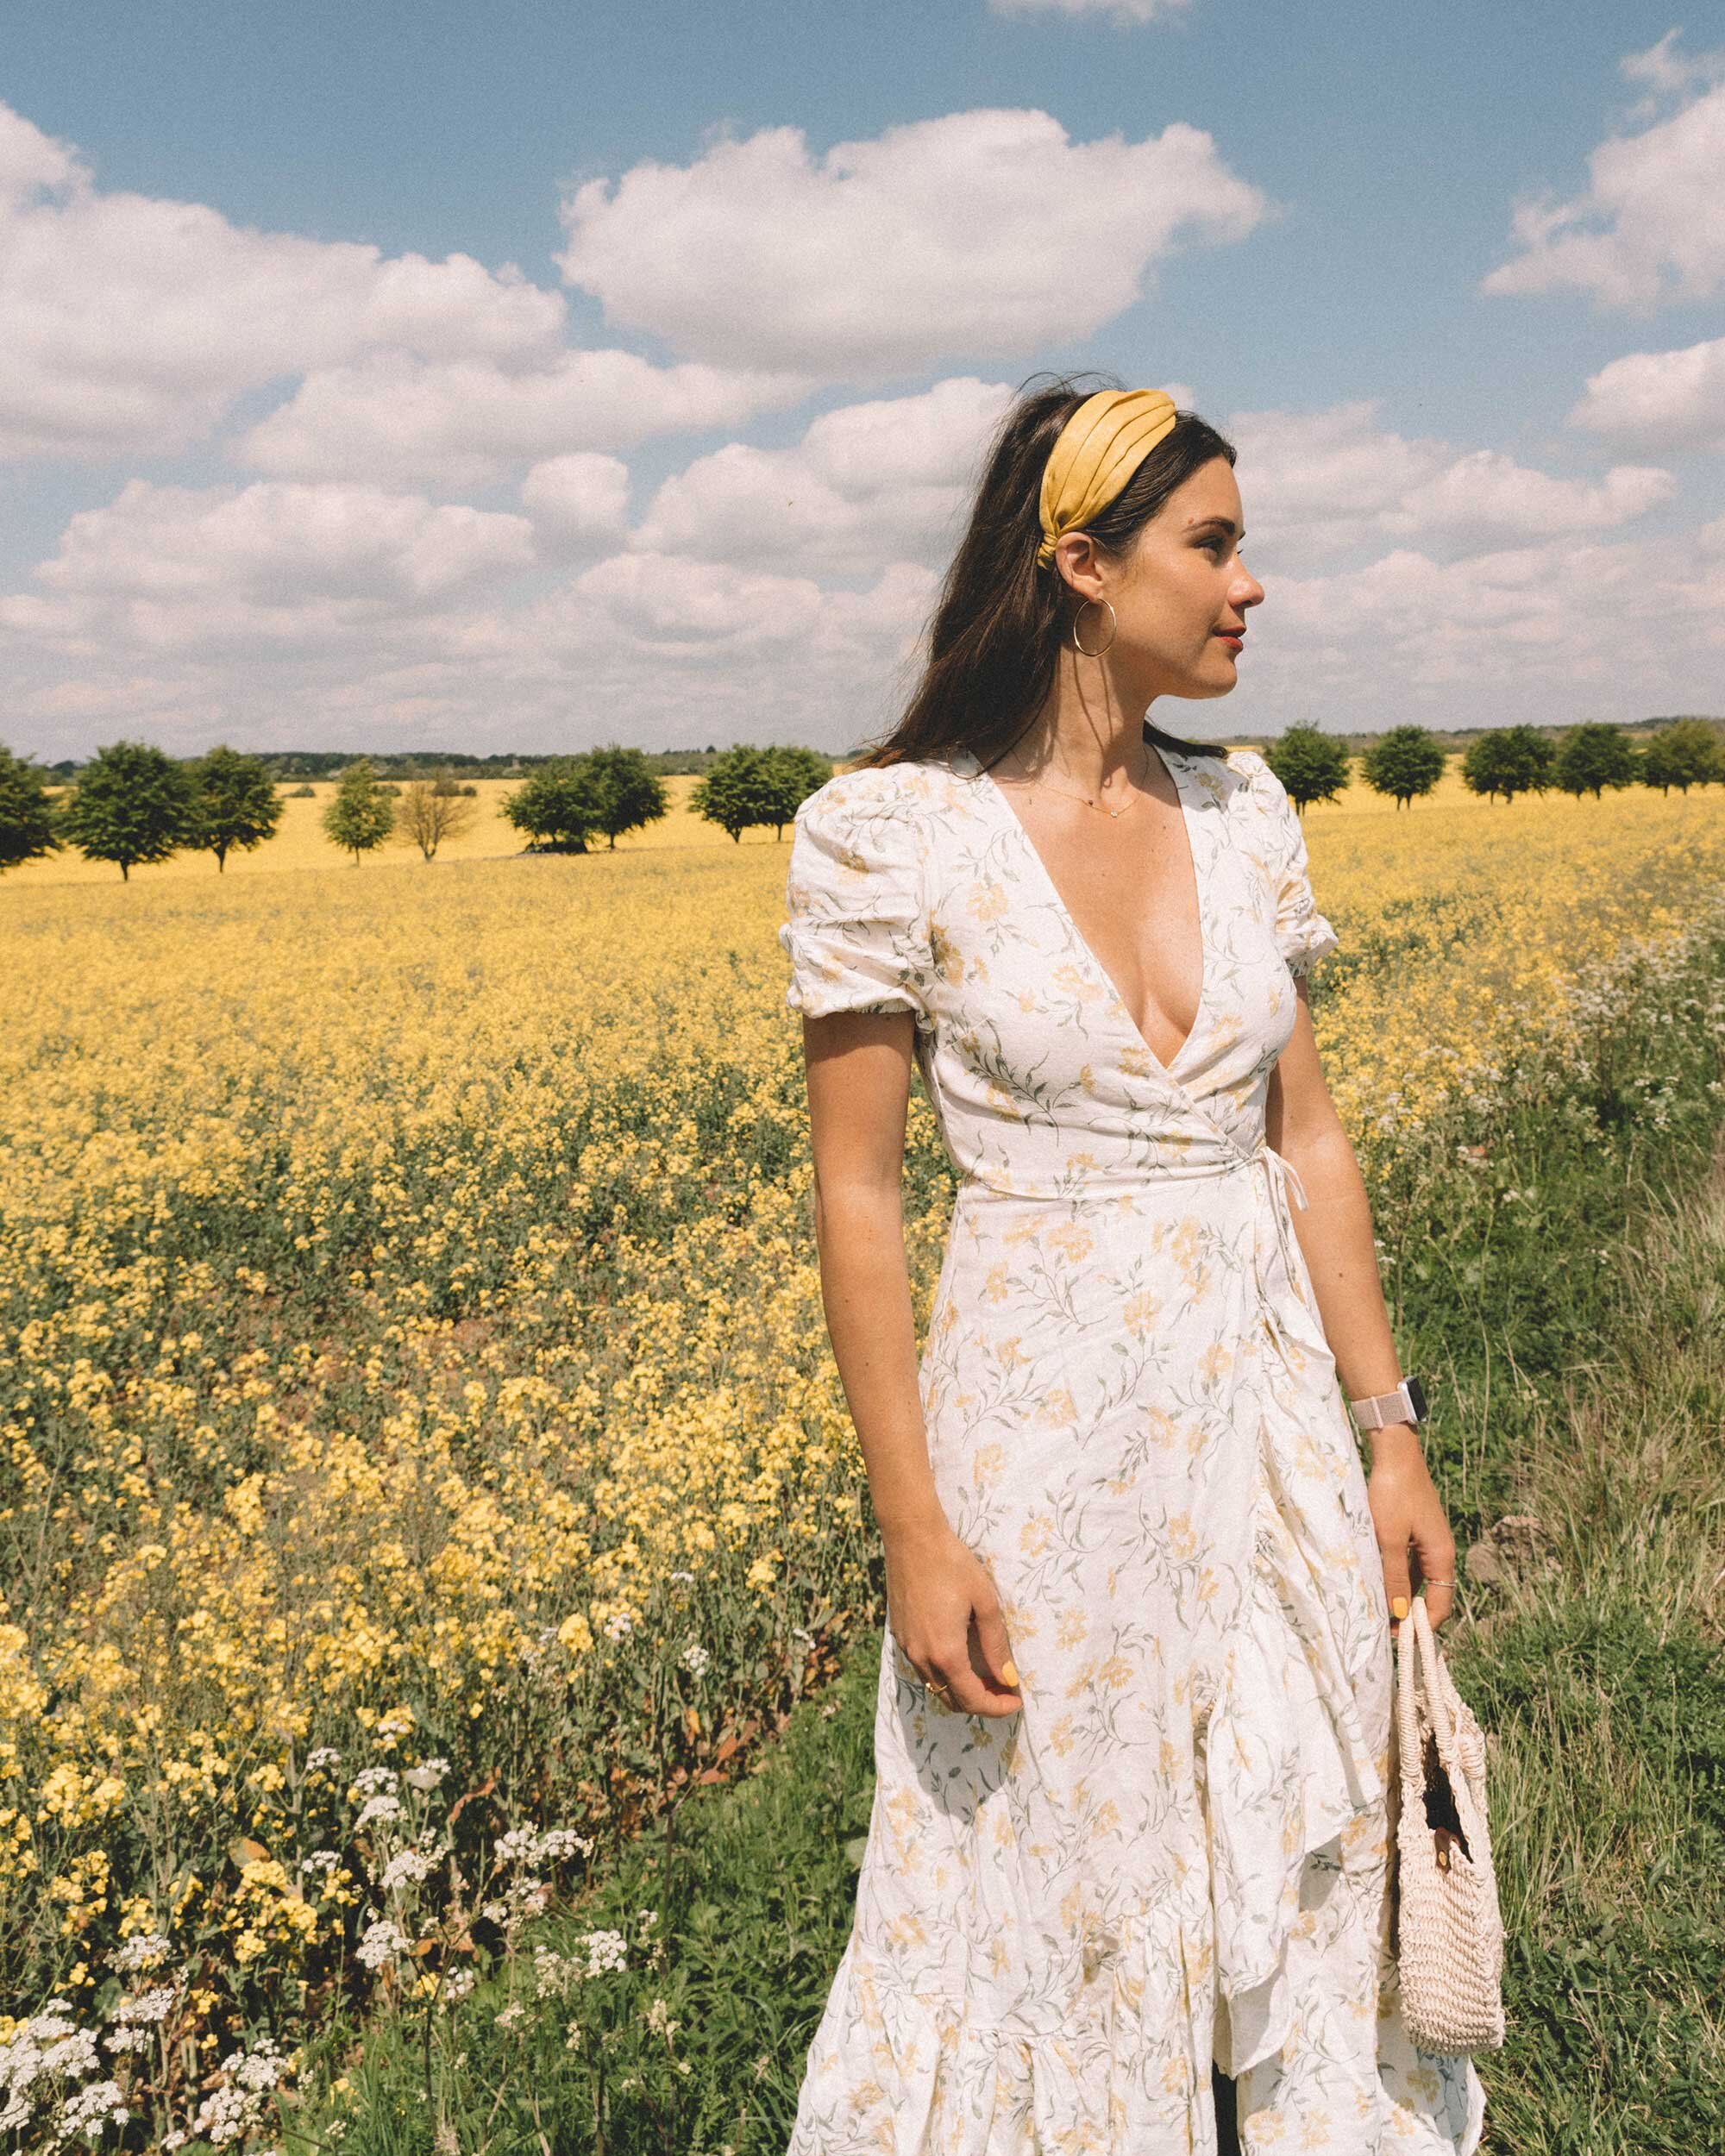 Sarah+Butler+of+Sarah+Styles+Seattle+wears+And+Other+Stories+Ruffled+Linen+Wrap+Midi+Dress+and+round+woven+bag+in+England+Countryside+for+the+perfect+floral+summer+dress+|+@sarahchristine+3.jpg